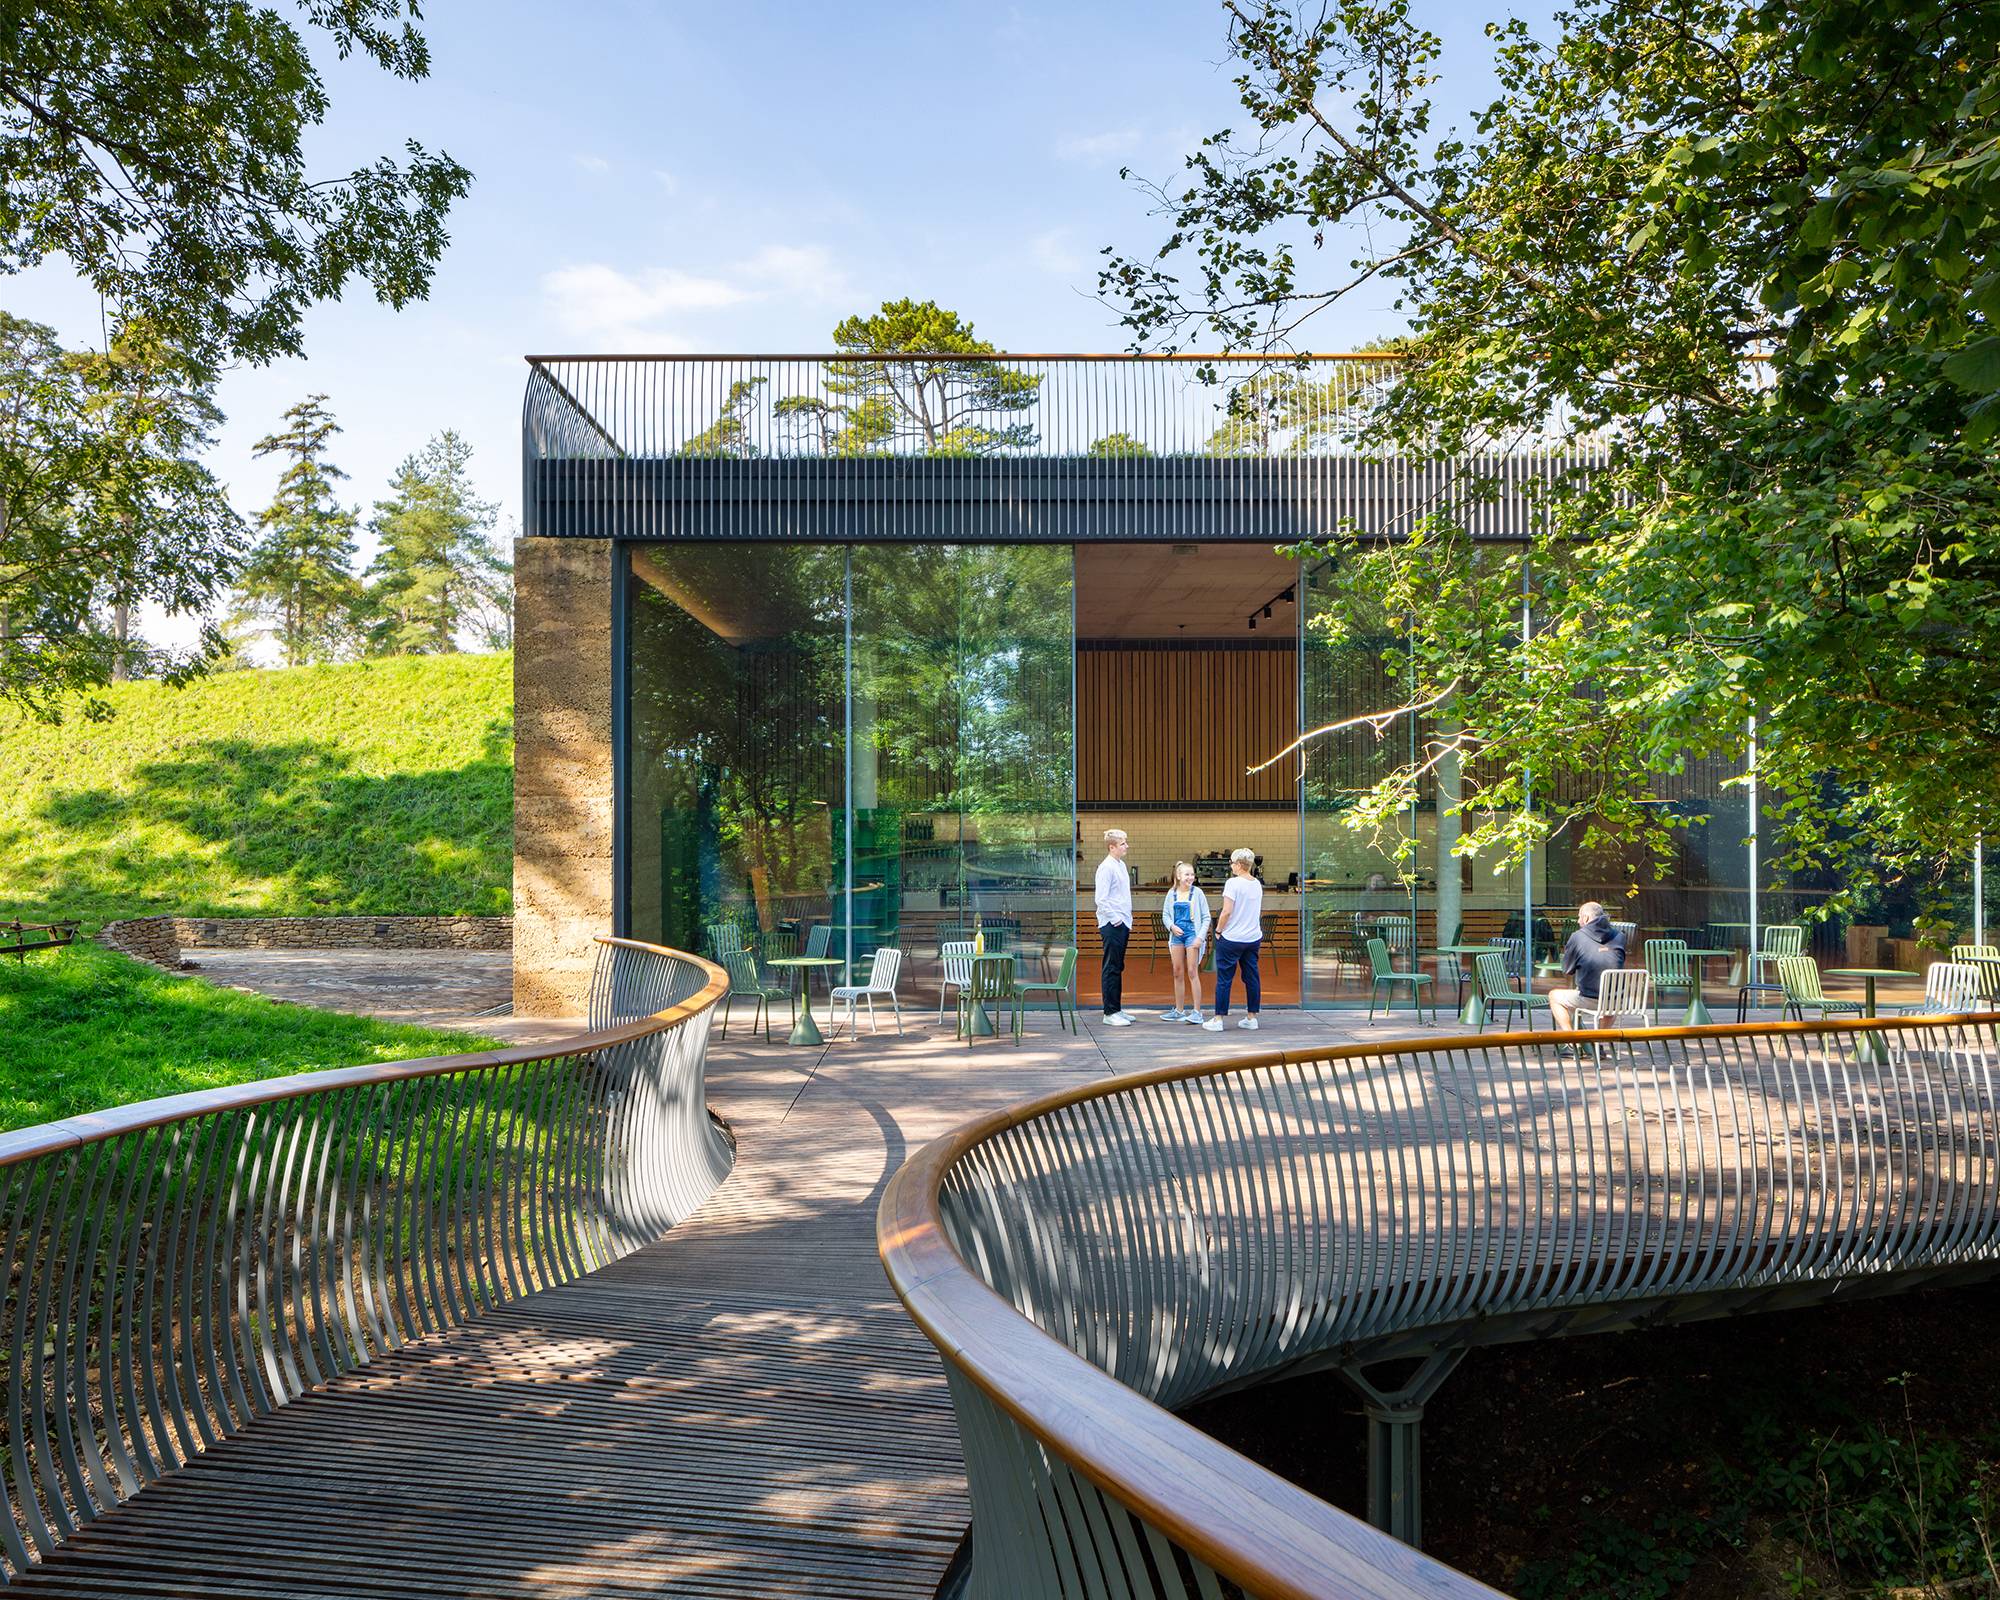 The Story of Gardening Museum (Somerset) by Stonewood Design with Mark Thomas Architects and Henry Fagan Engineering. Photo: Craig Auckland